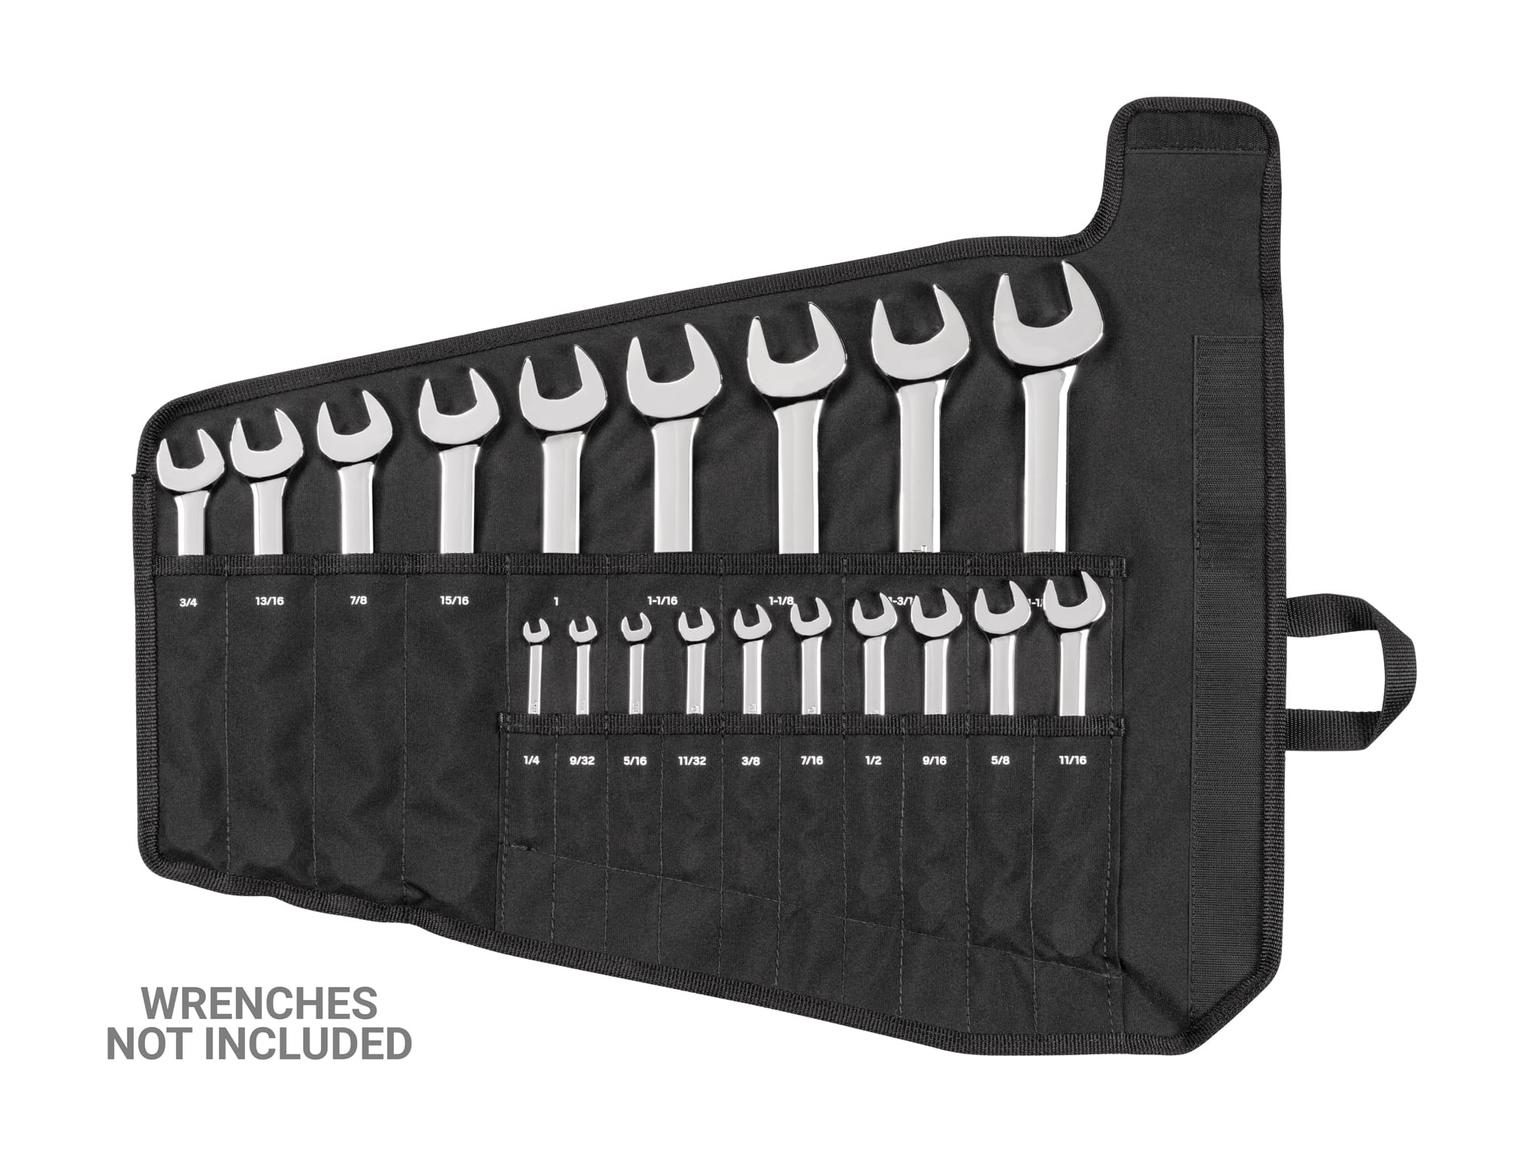 TEKTON OTP21104-T 19-Tool Combination Wrench Pouch (1/4 - 1-1/4 in.)